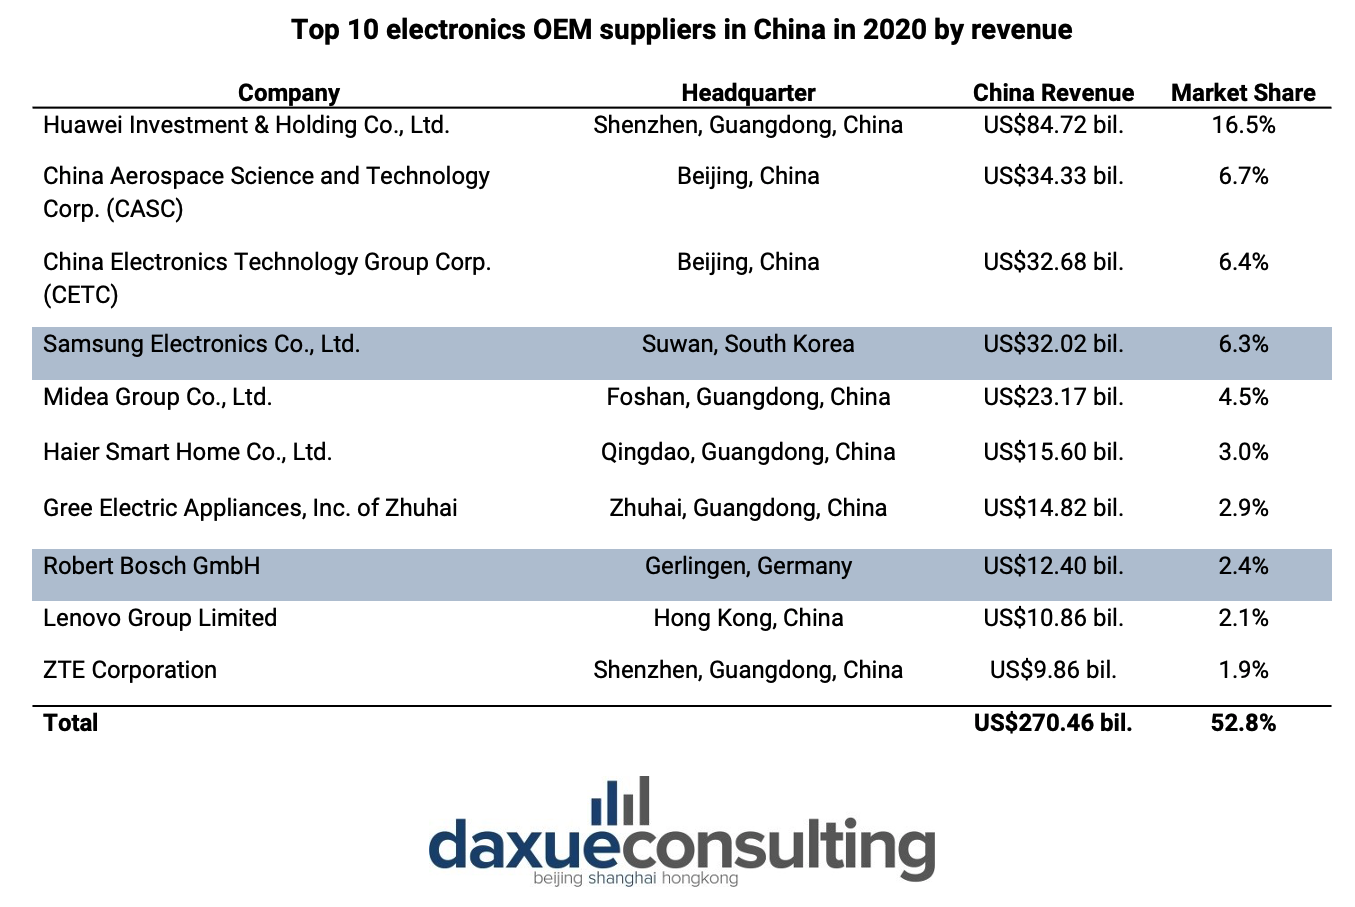 Top 10 electronics Chinese OEM companies in 2020 by revenue